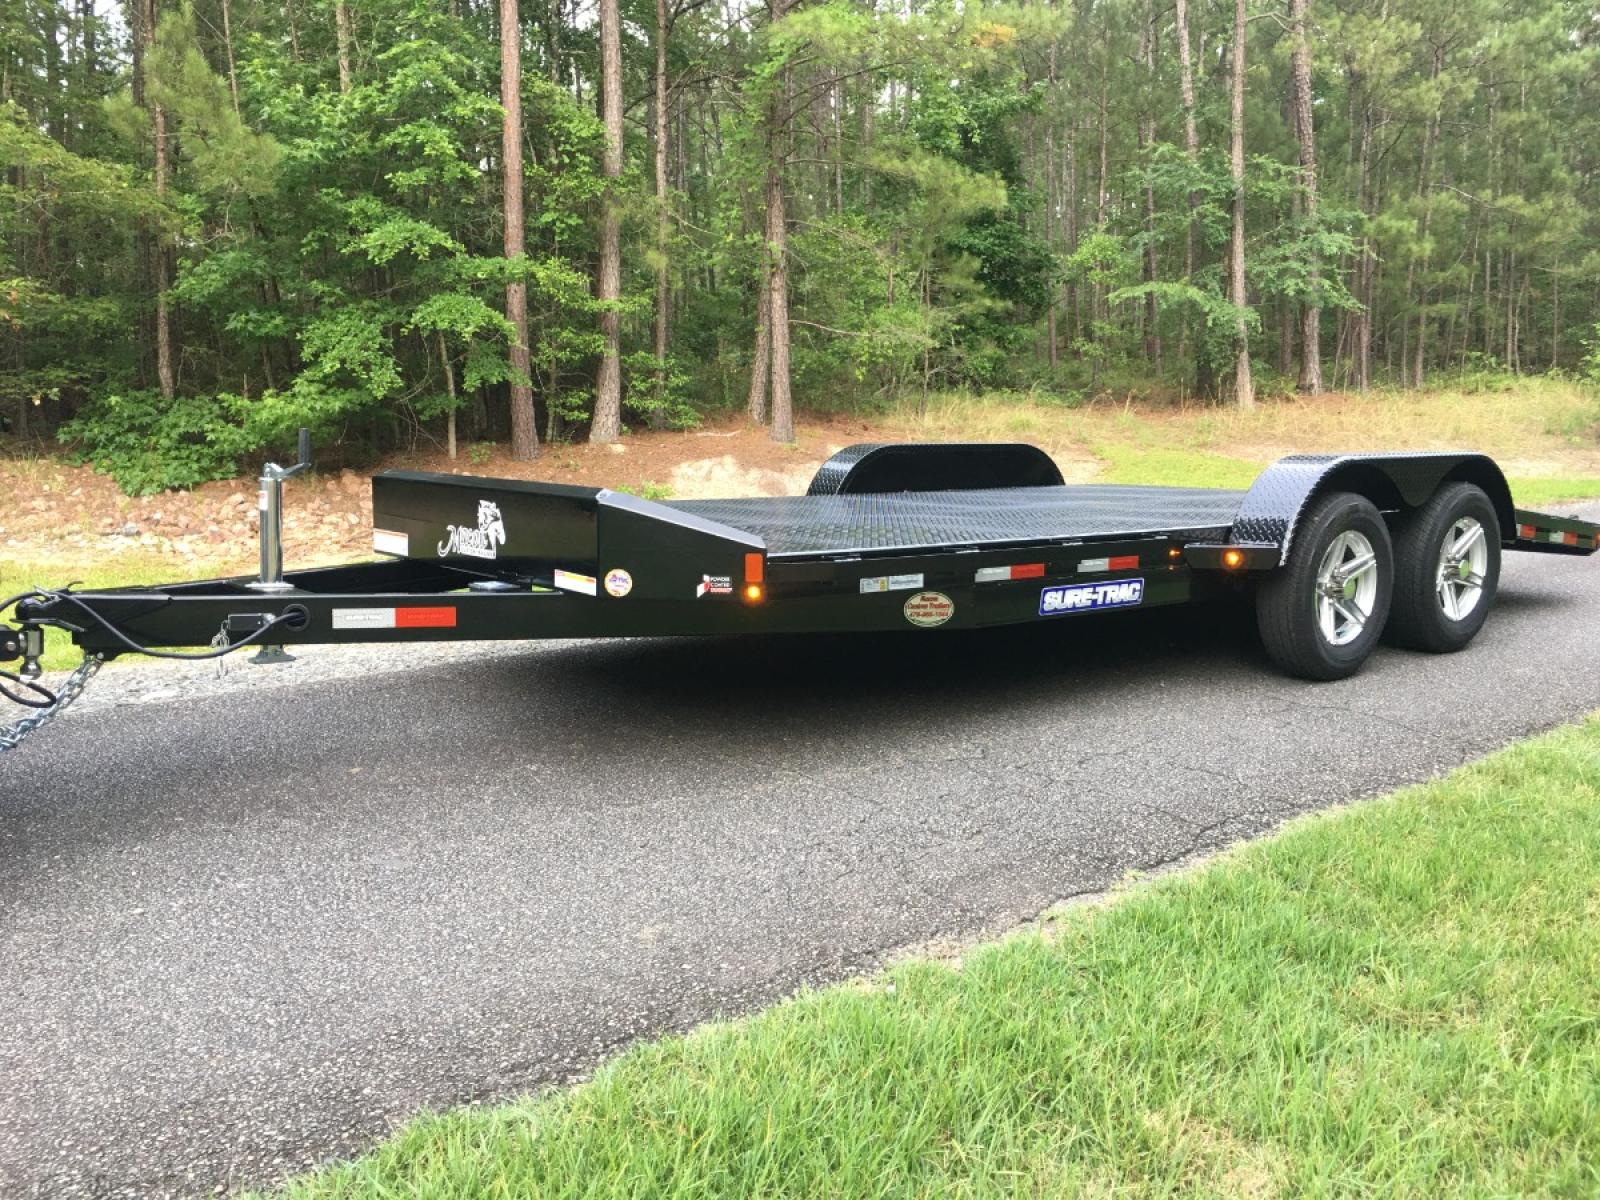 2022 Black Sure-Trac 7ft X 18ft Tandem , located at 1330 Rainey Rd., Macon, 31220, (478) 960-1044, 32.845638, -83.778687 - Please Hurry! Clearance Priced to Sell! New Deluxe Sure Trac Brand 7ft X 18ft All Steel Car Hauler Trailer. 7ft Wide and 18ft Long, Including the 48" Long Beaver Tail Low Profile Design for Easy Loading that Porsche or BMW Car! The Rear Slide Under Ramps are Both Lightweight and Heavy Duty! Rem - Photo #0